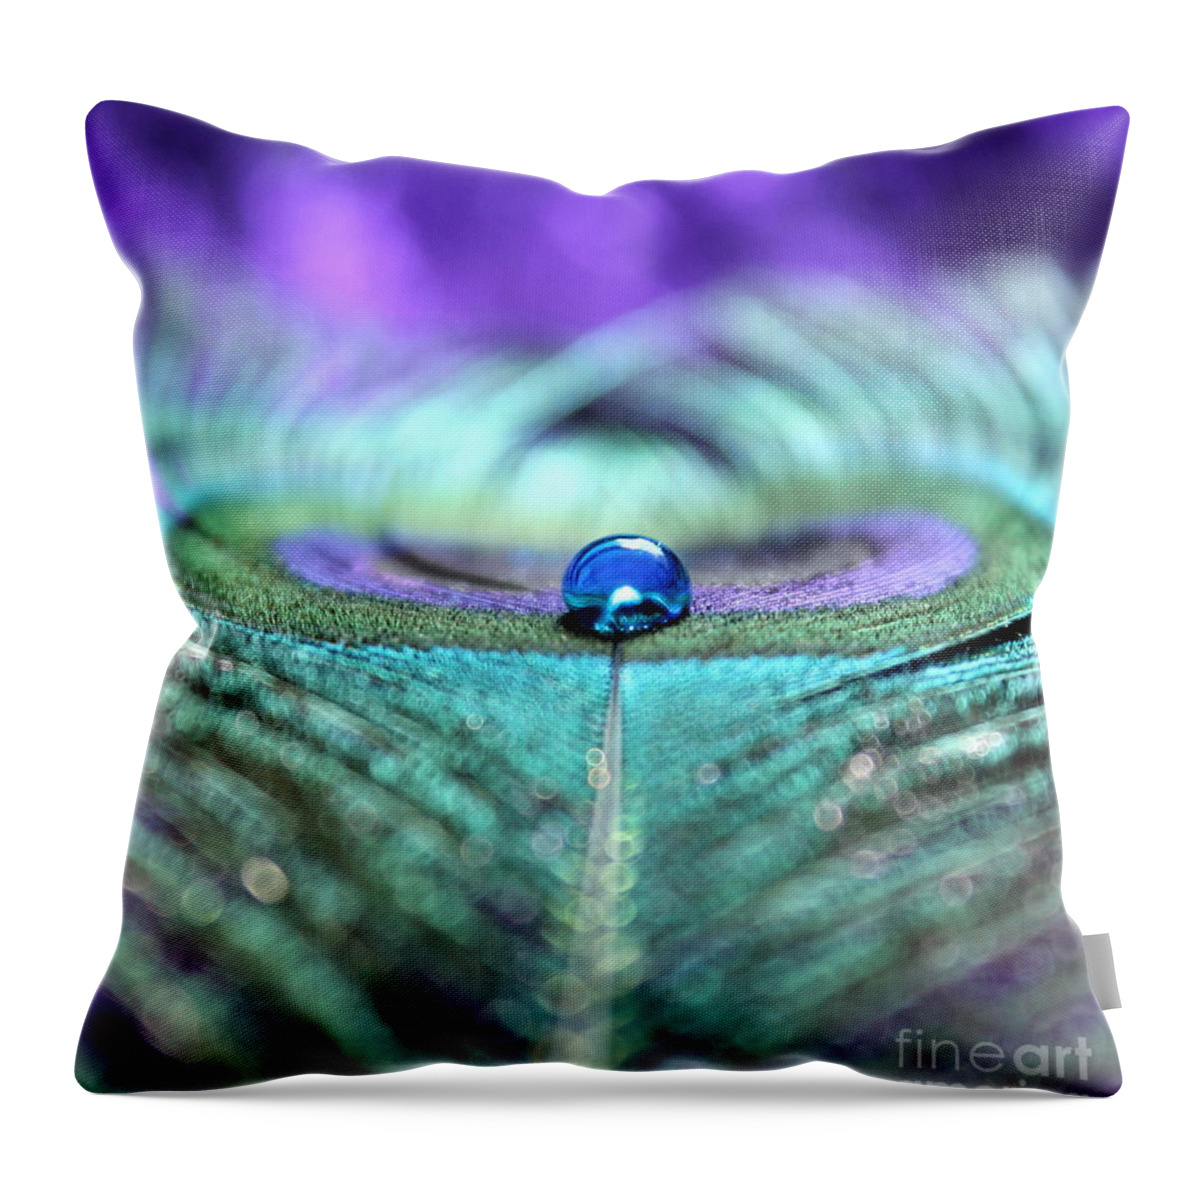 Peacock Feather Throw Pillow featuring the photograph Exotic Peacock by Krissy Katsimbras